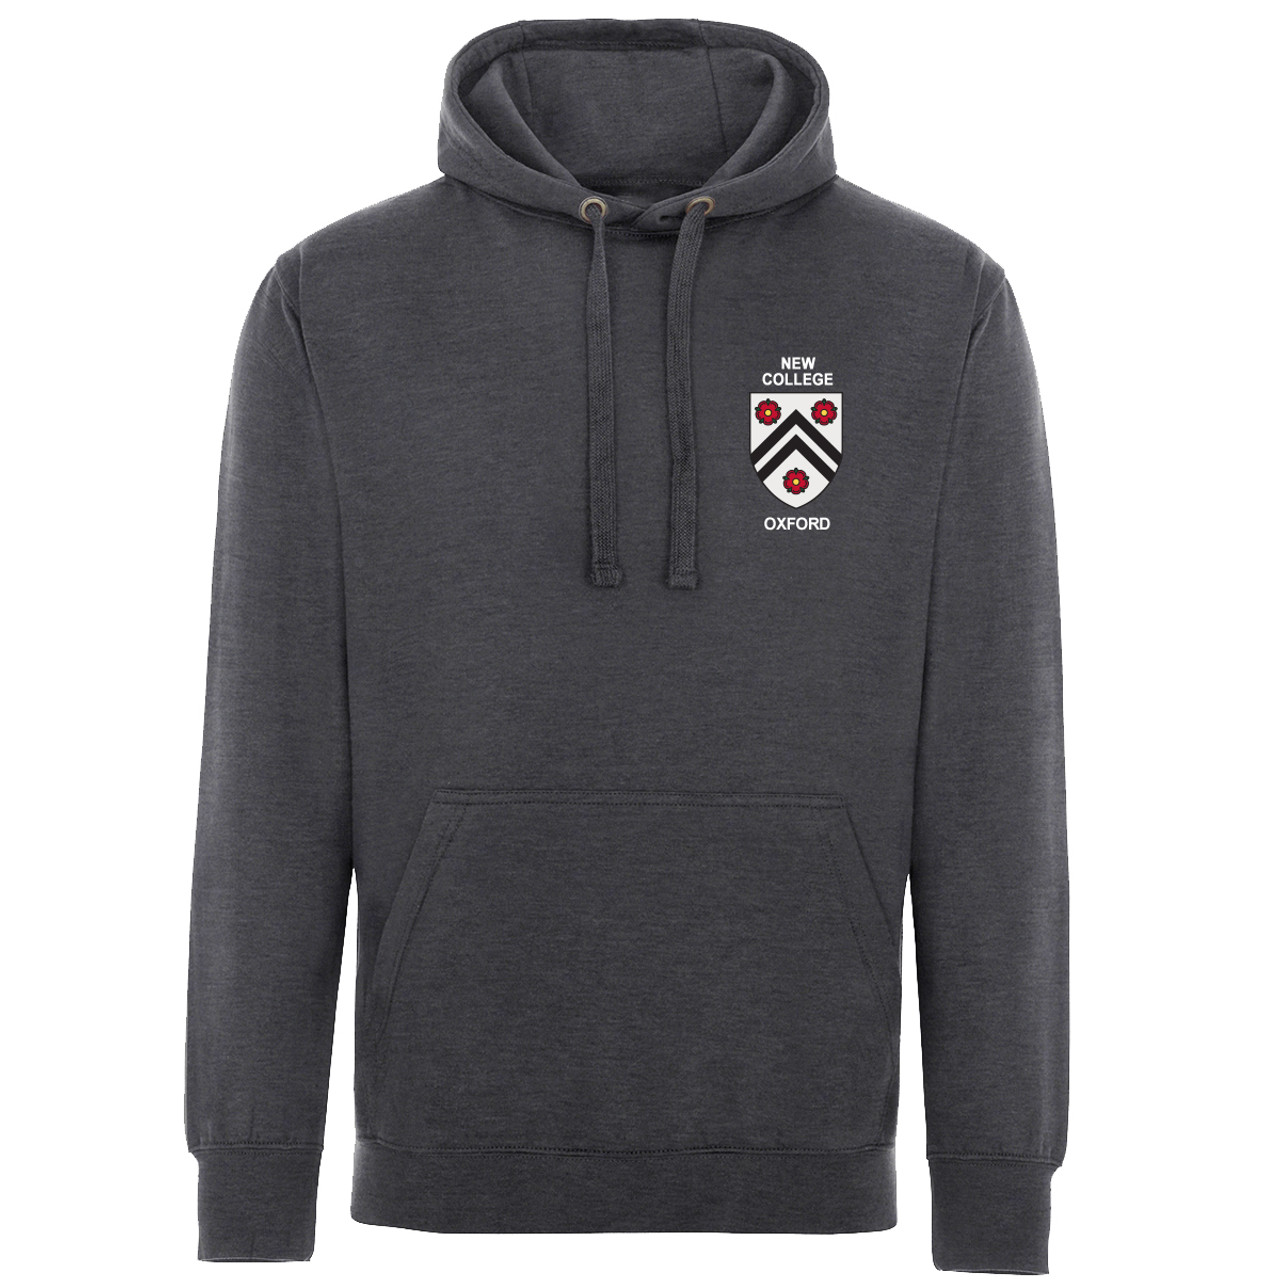 New Hoodie - Charcoal | University of Oxford